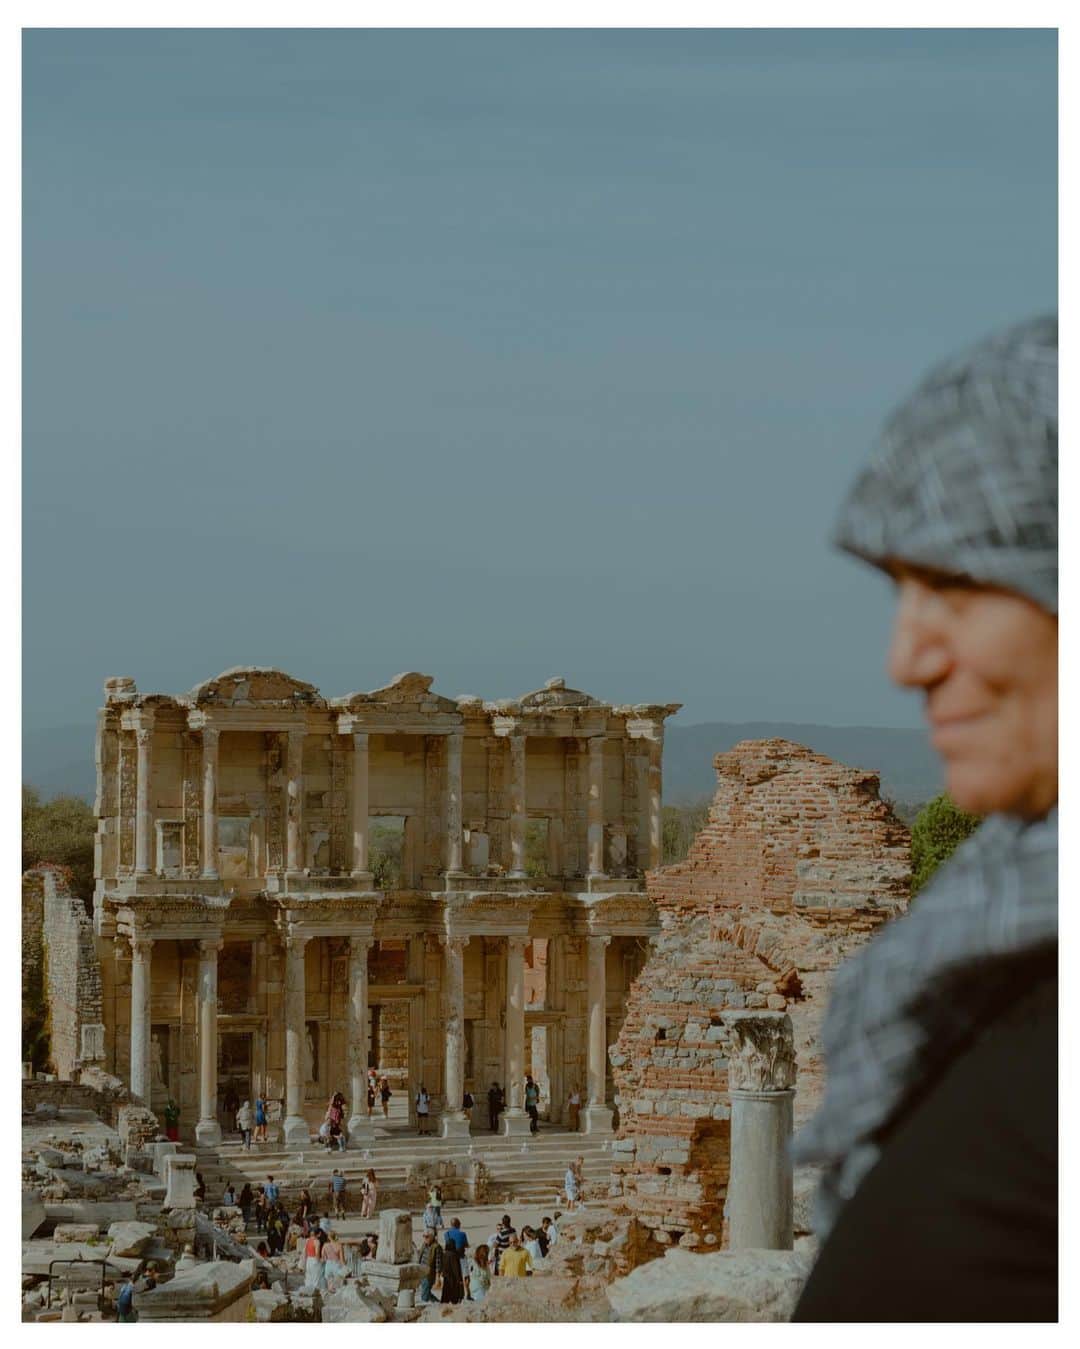 Putri Anindyaさんのインスタグラム写真 - (Putri AnindyaInstagram)「Walking on the history in Ephesus //   I always want to visit this place since I watched it in the documentary when I was a kid. History about human civilization from the greek and romans era always interest me.   The city of Ephesus, located in Izmir region of Türkiye, was one of the most important ports in the ancient world. The city, which was the center of trade for the Mediterranean Sea, has a very old history that changed hands under the rule of many kingdoms and empires many times.  According to legend, the Ionian prince Androclos founded Ephesus in the 11th century BC. The legend says that as Androclos searched for a new Greek settlement, he turned to the oracles for guidance. The oracles told him a boar and a fish would show him the new location.  One day, as Androclos was frying fish over an open fire, a fish flopped out of the frying pan and landed in the nearby bushes. A spark ignited the bushes and a wild boar ran out. Recalling the oracles’ wisdom, Androclos built his new settlement where the bushes stood and called it Ephesus.   This story also told in a very beautiful digital experience in the @demmuseums @ephesusexpmuseum , a recently opened museum in Ephesus where they also explain the importance of the goddess Artemis and its temple. But on 356 BC, the day Alexander the Great was said to have been born, the temple burned to the ground.   This history of a city coming under the rule of so many diverse groups, from Lydians, Persians, Greeks, Romans and more, only shows the strategic importance of Ephesus and its location in antiquity.   In 129 BC the city became the seat of the regional Roman governor. The reforms of Caesar Augustus brought Ephesus to its most prosperous time, which lasted until the third century A.D. Many of the most iconic structures visible today, such as the Library of Celsus (first and the last of my first slide collage) were built around this period.   Well the story is looong but it is super interesting. I just love ancient historical places so much 🫶🏼   So which slide is your favorite? And have you been here?   #TurkAegean #Goİzmir #EfesKültürYoluFestivali   @goturkiye @goizmir」11月8日 22時31分 - puanindya